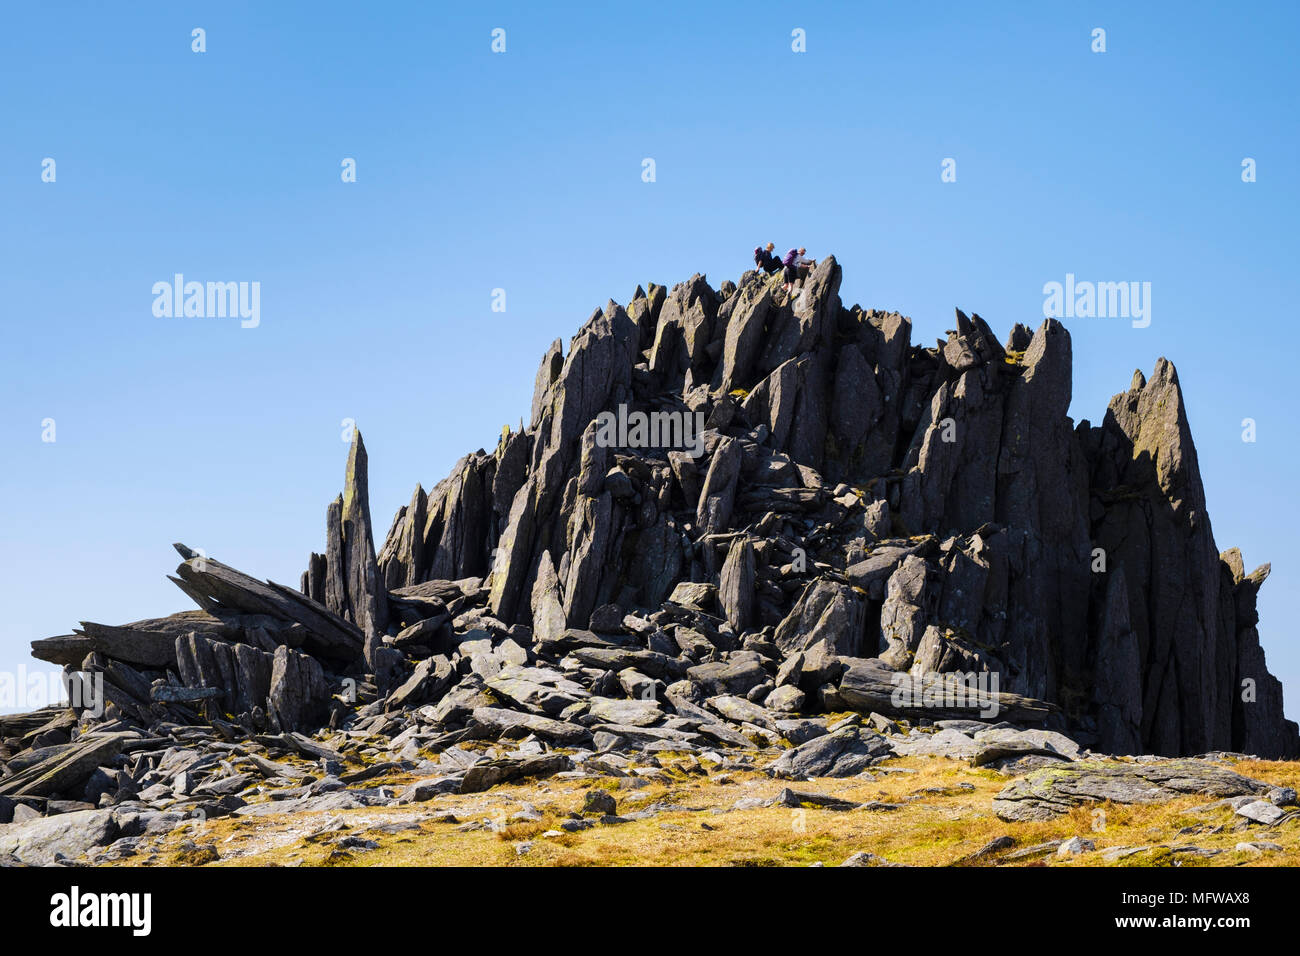 Castell y Gwynt on Glyder Fach mountain with hikers scrambling down the rocks in Snowdonia National Park. Wales, UK, Britain Stock Photo